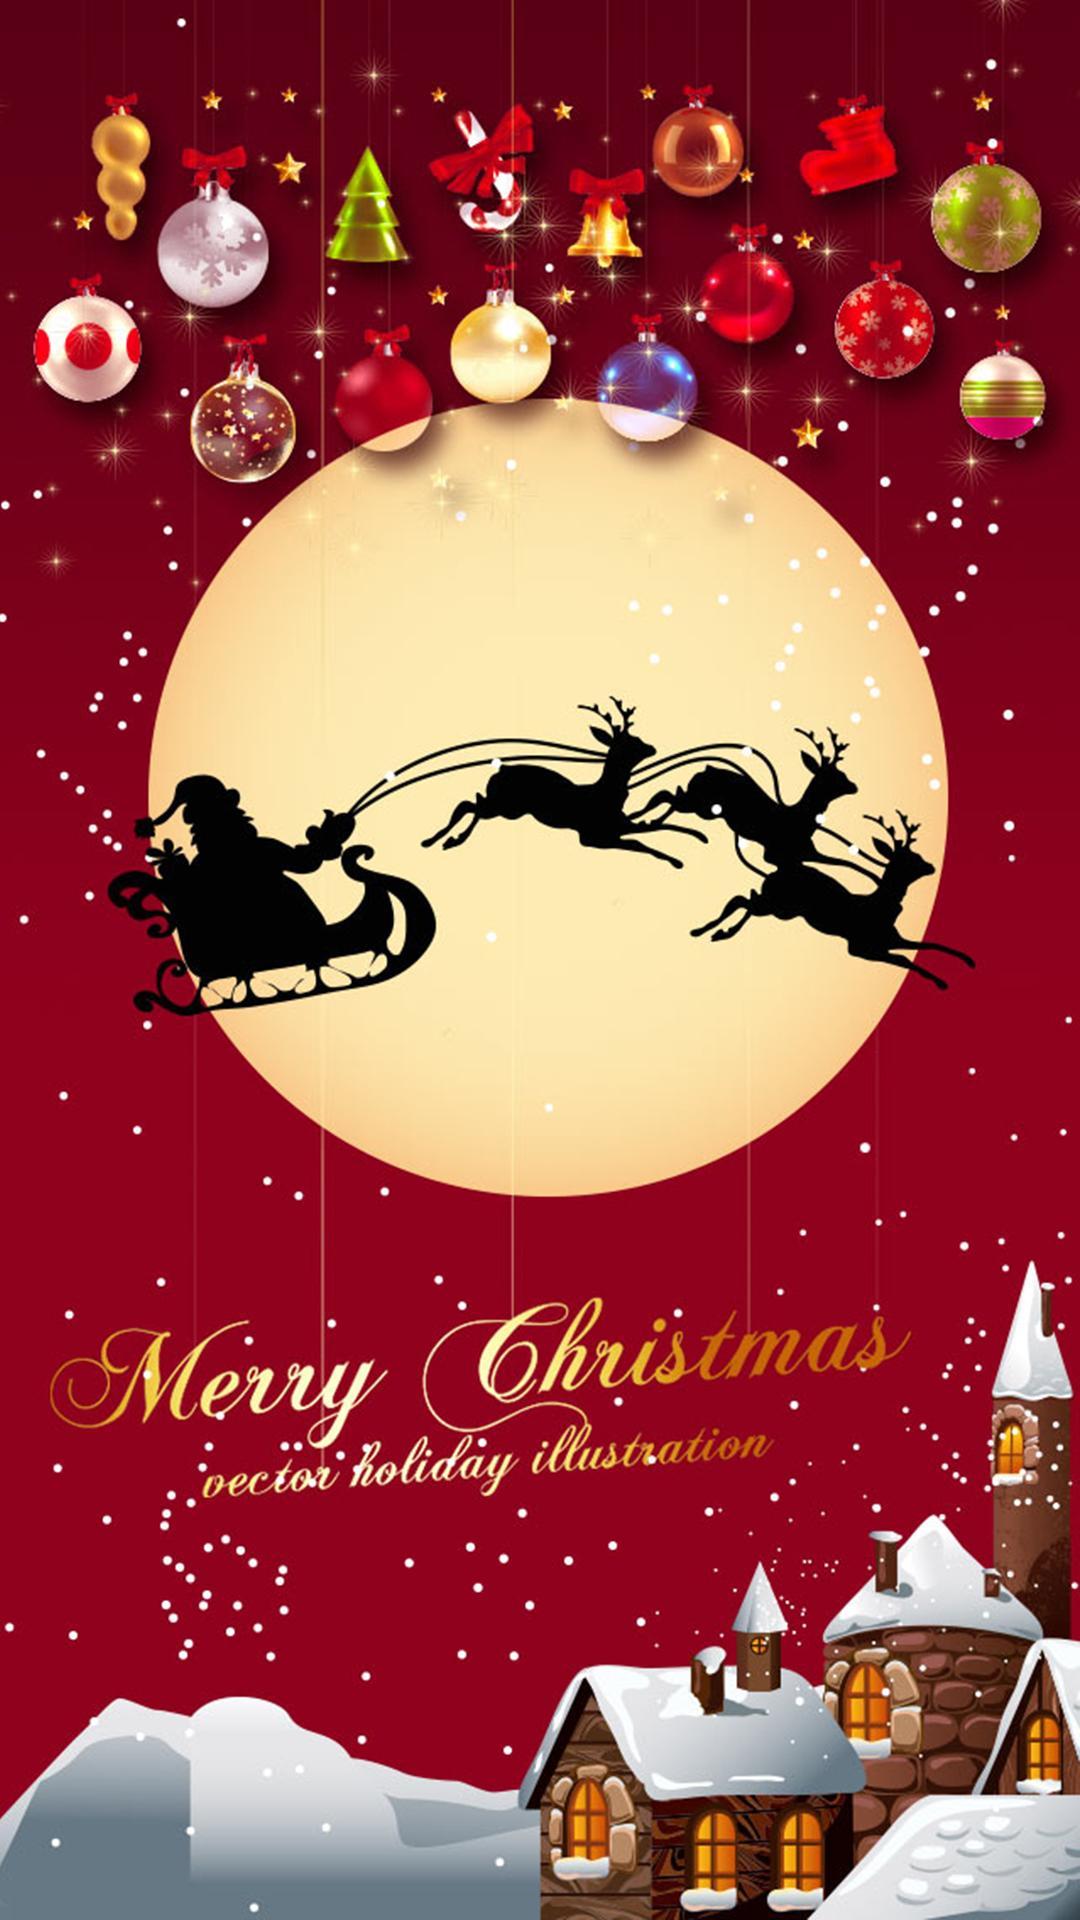 Christmas Full HD Android Wallpapers - Wallpaper Cave